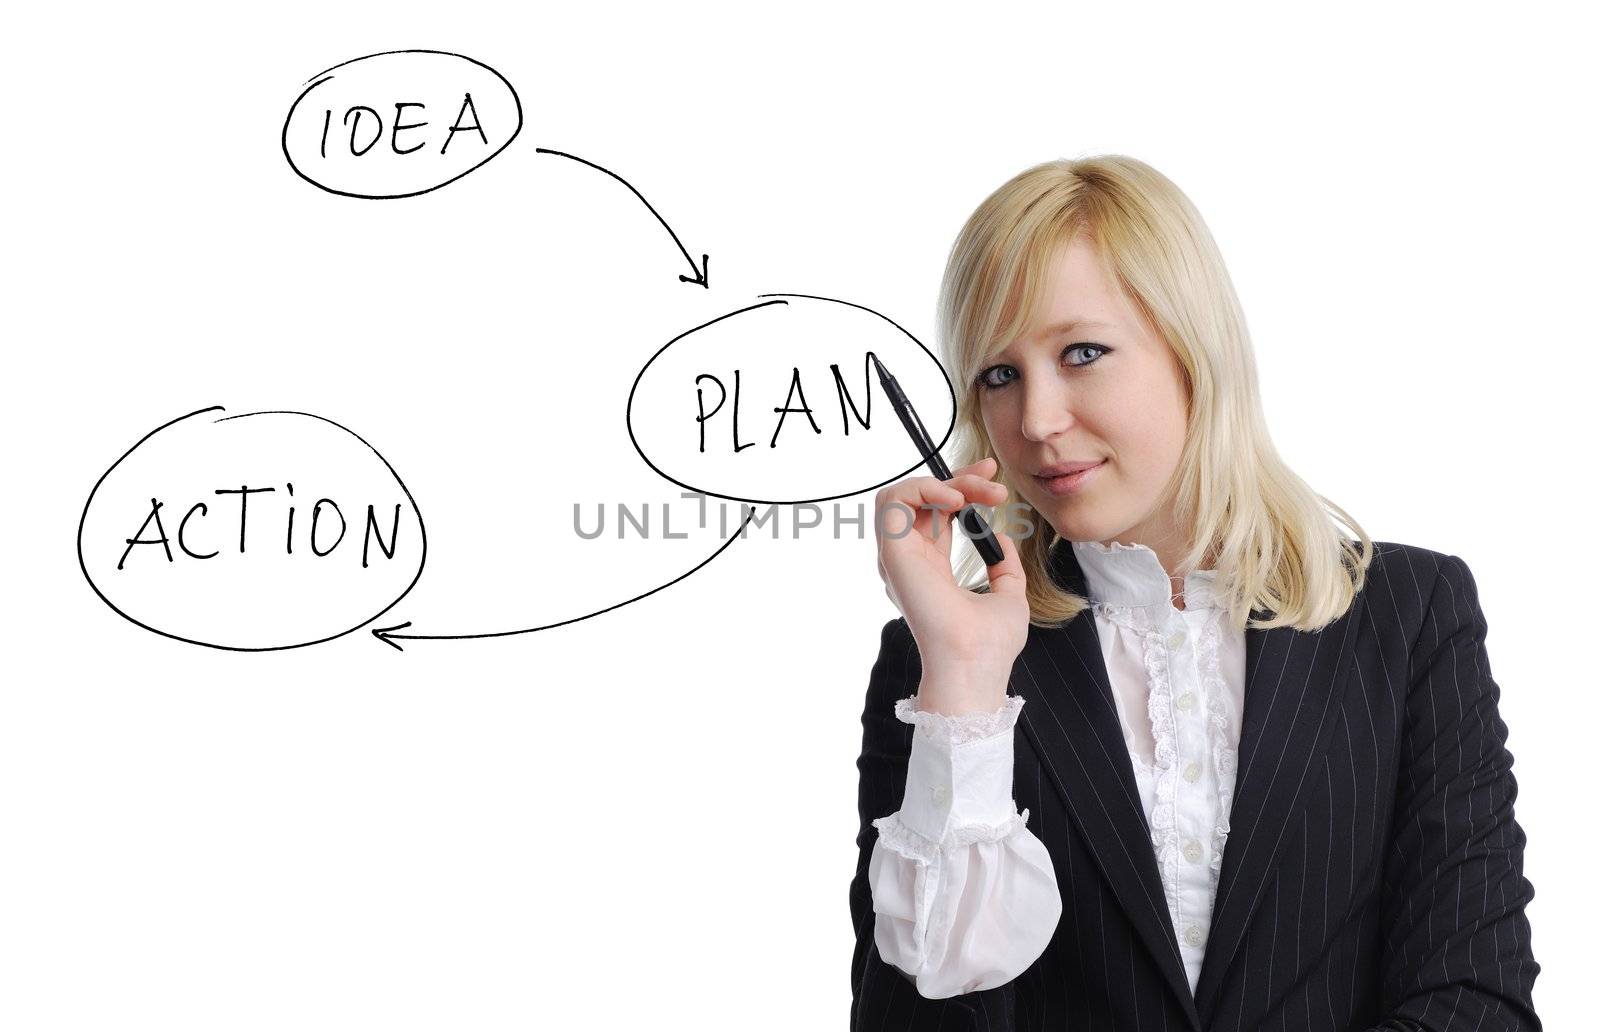 An image of a businesswoman drawing a plan